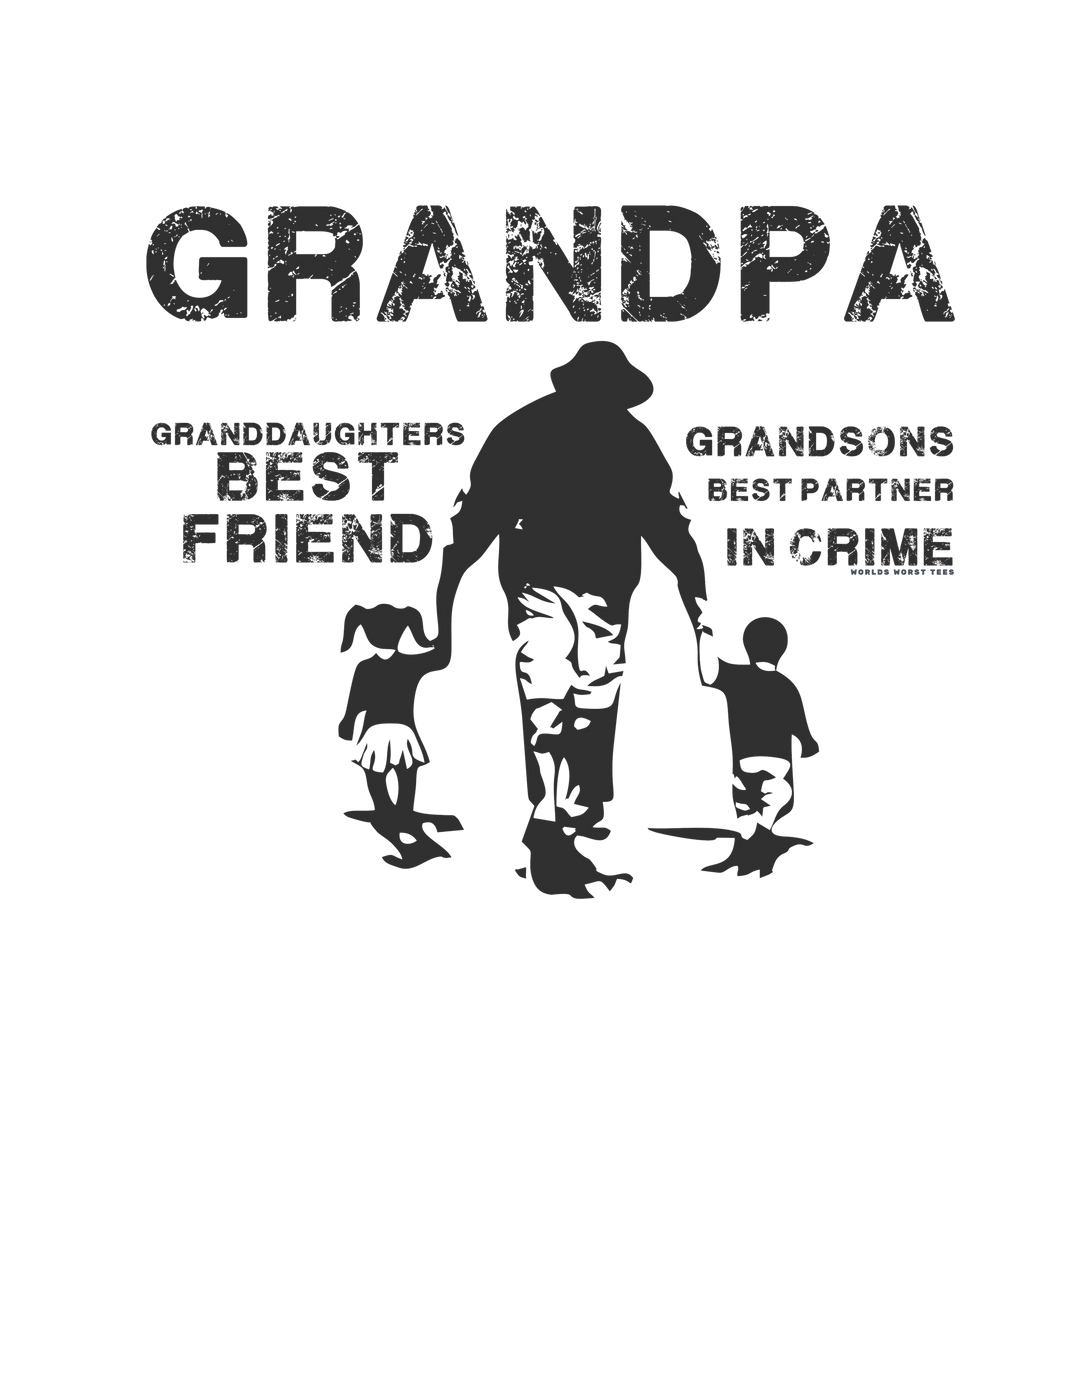 A black and white graphic tee featuring a man and two children holding hands, embodying family bonds. Grandpa and Grandkids Tee: 100% ring-spun cotton, medium weight, relaxed fit, durable double-needle stitching, seamless design.